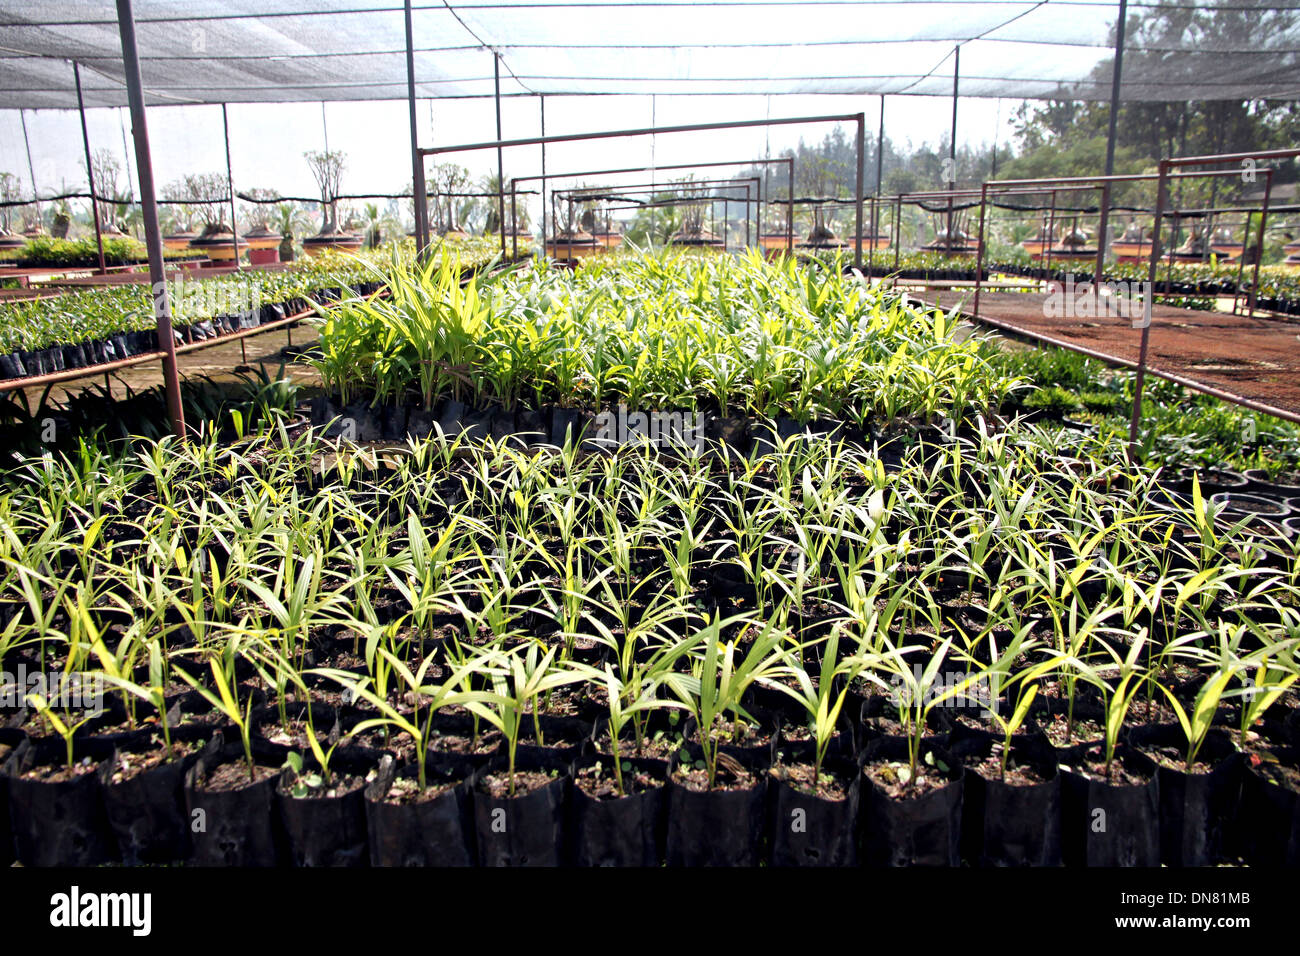 The Palm Seedlings in the Nursery Farms. Stock Photo